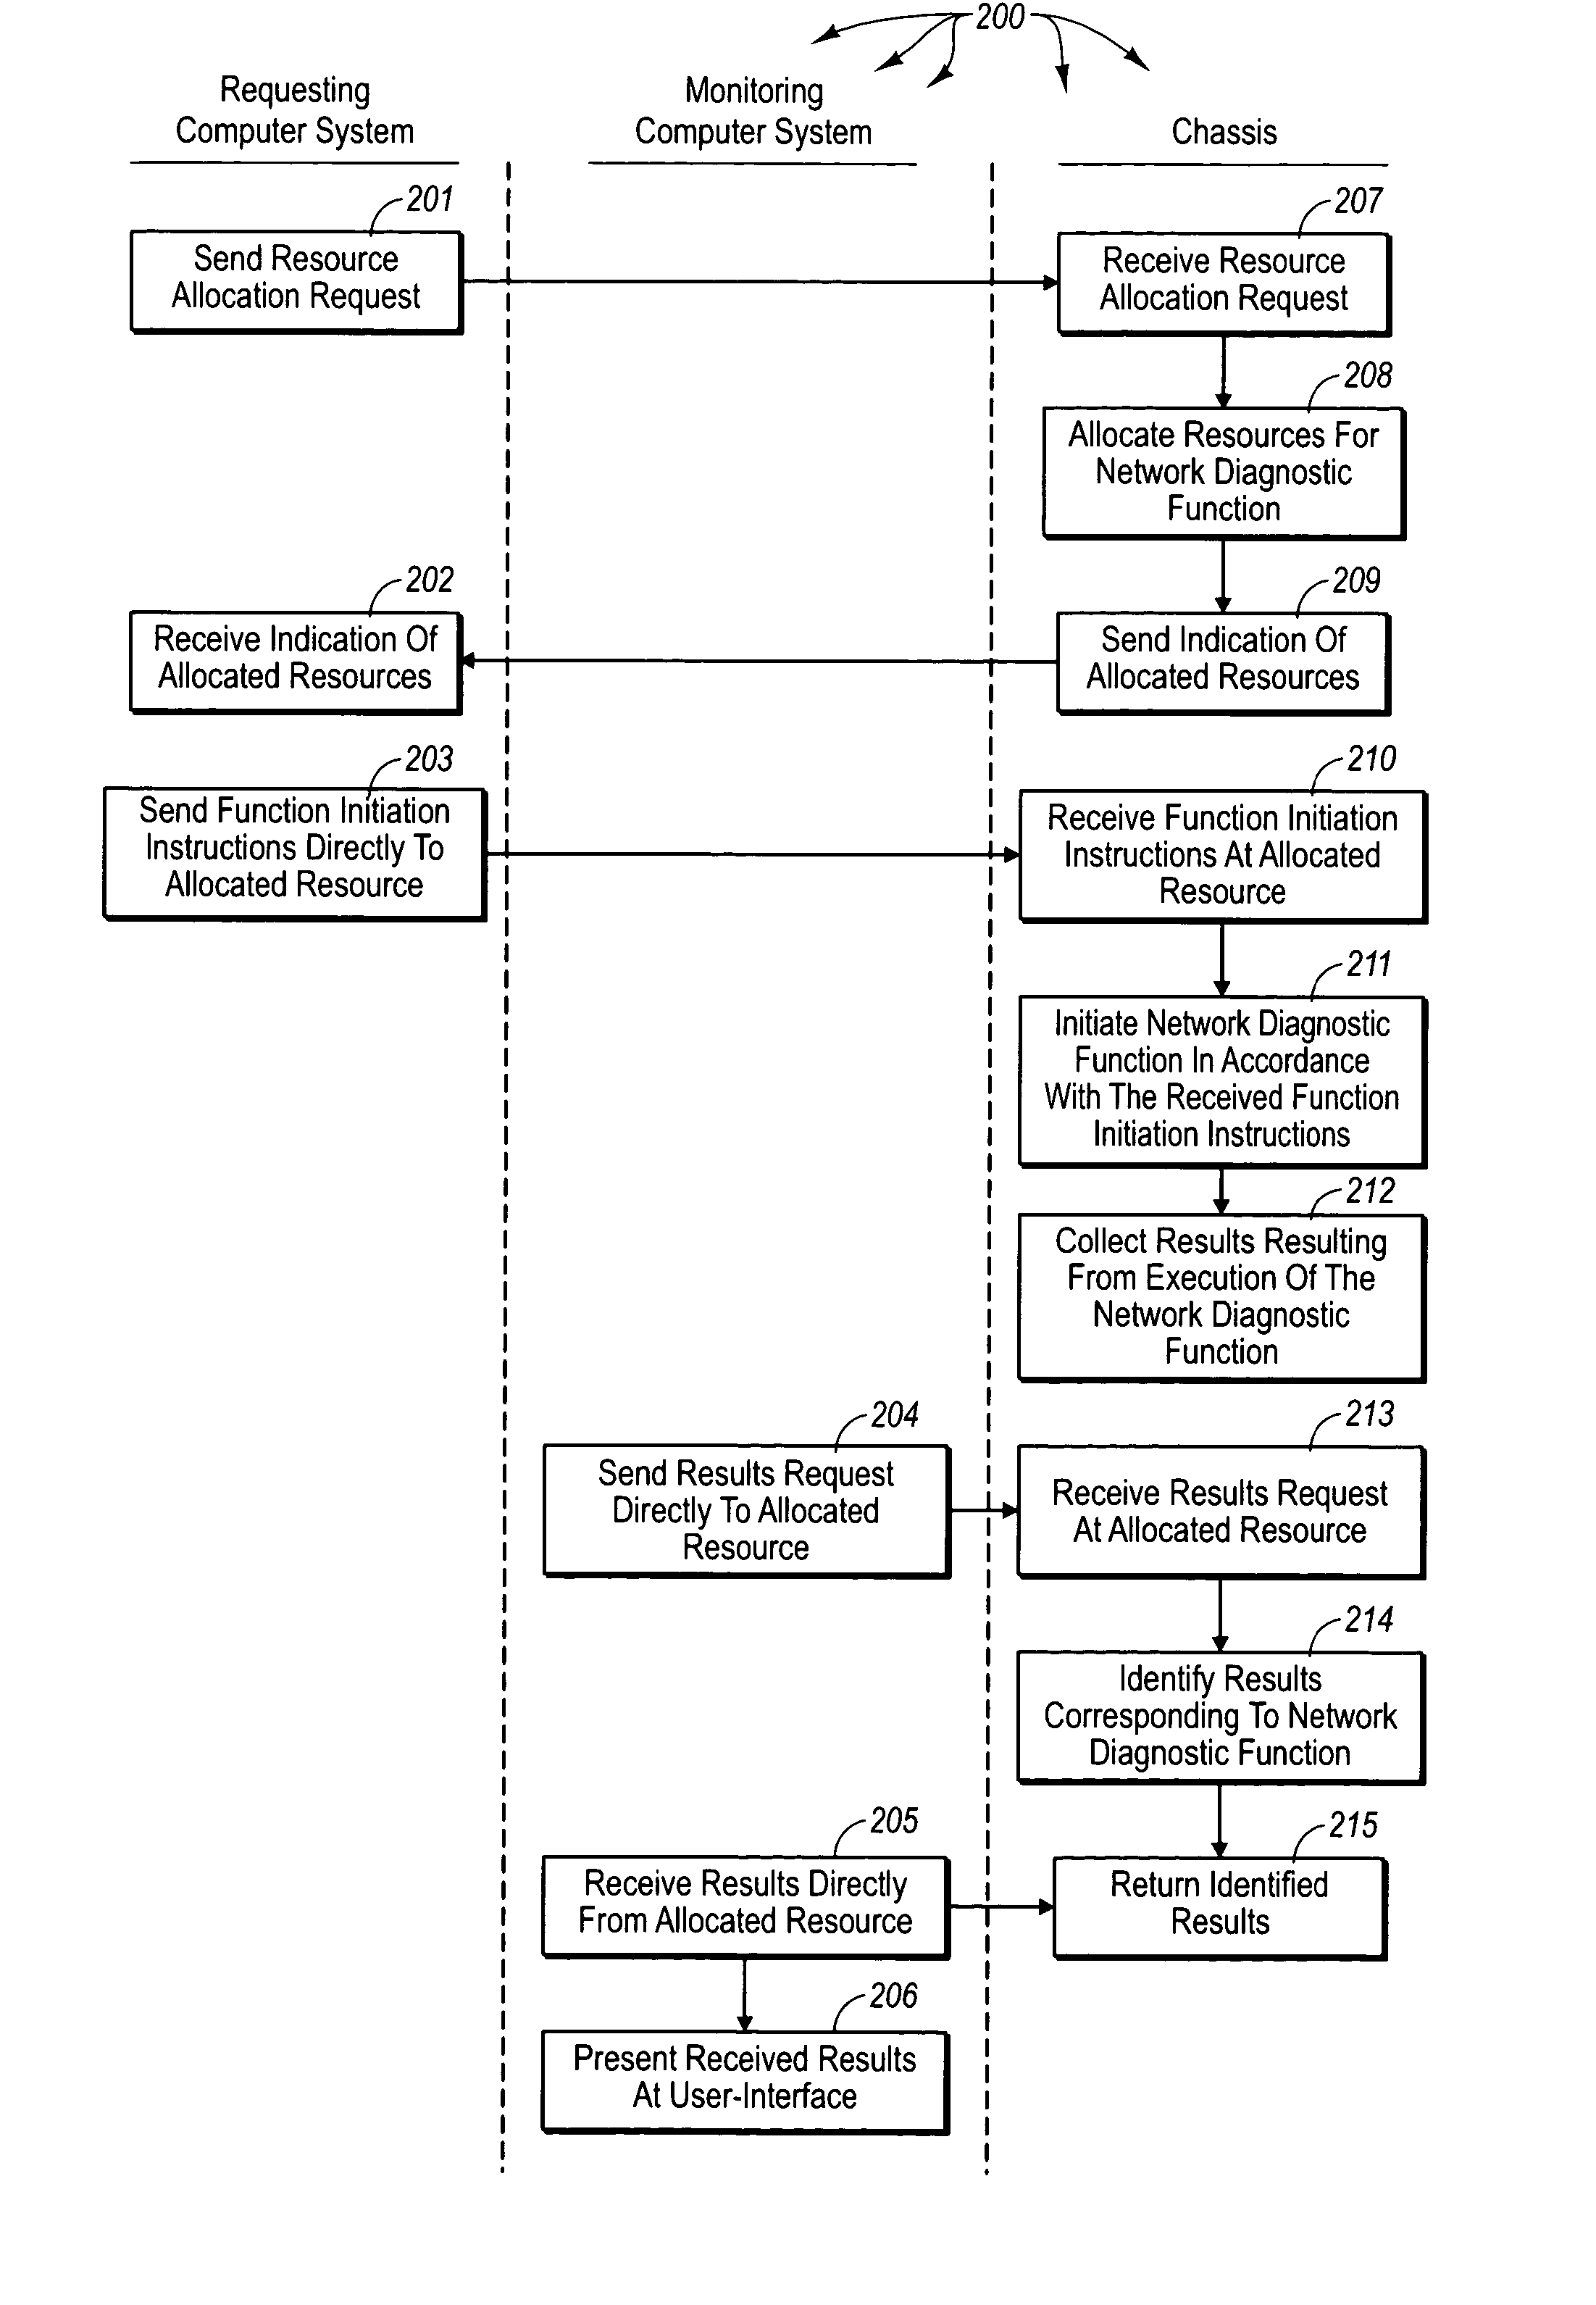 Accessing results of network diagnostic functions in a distributed system